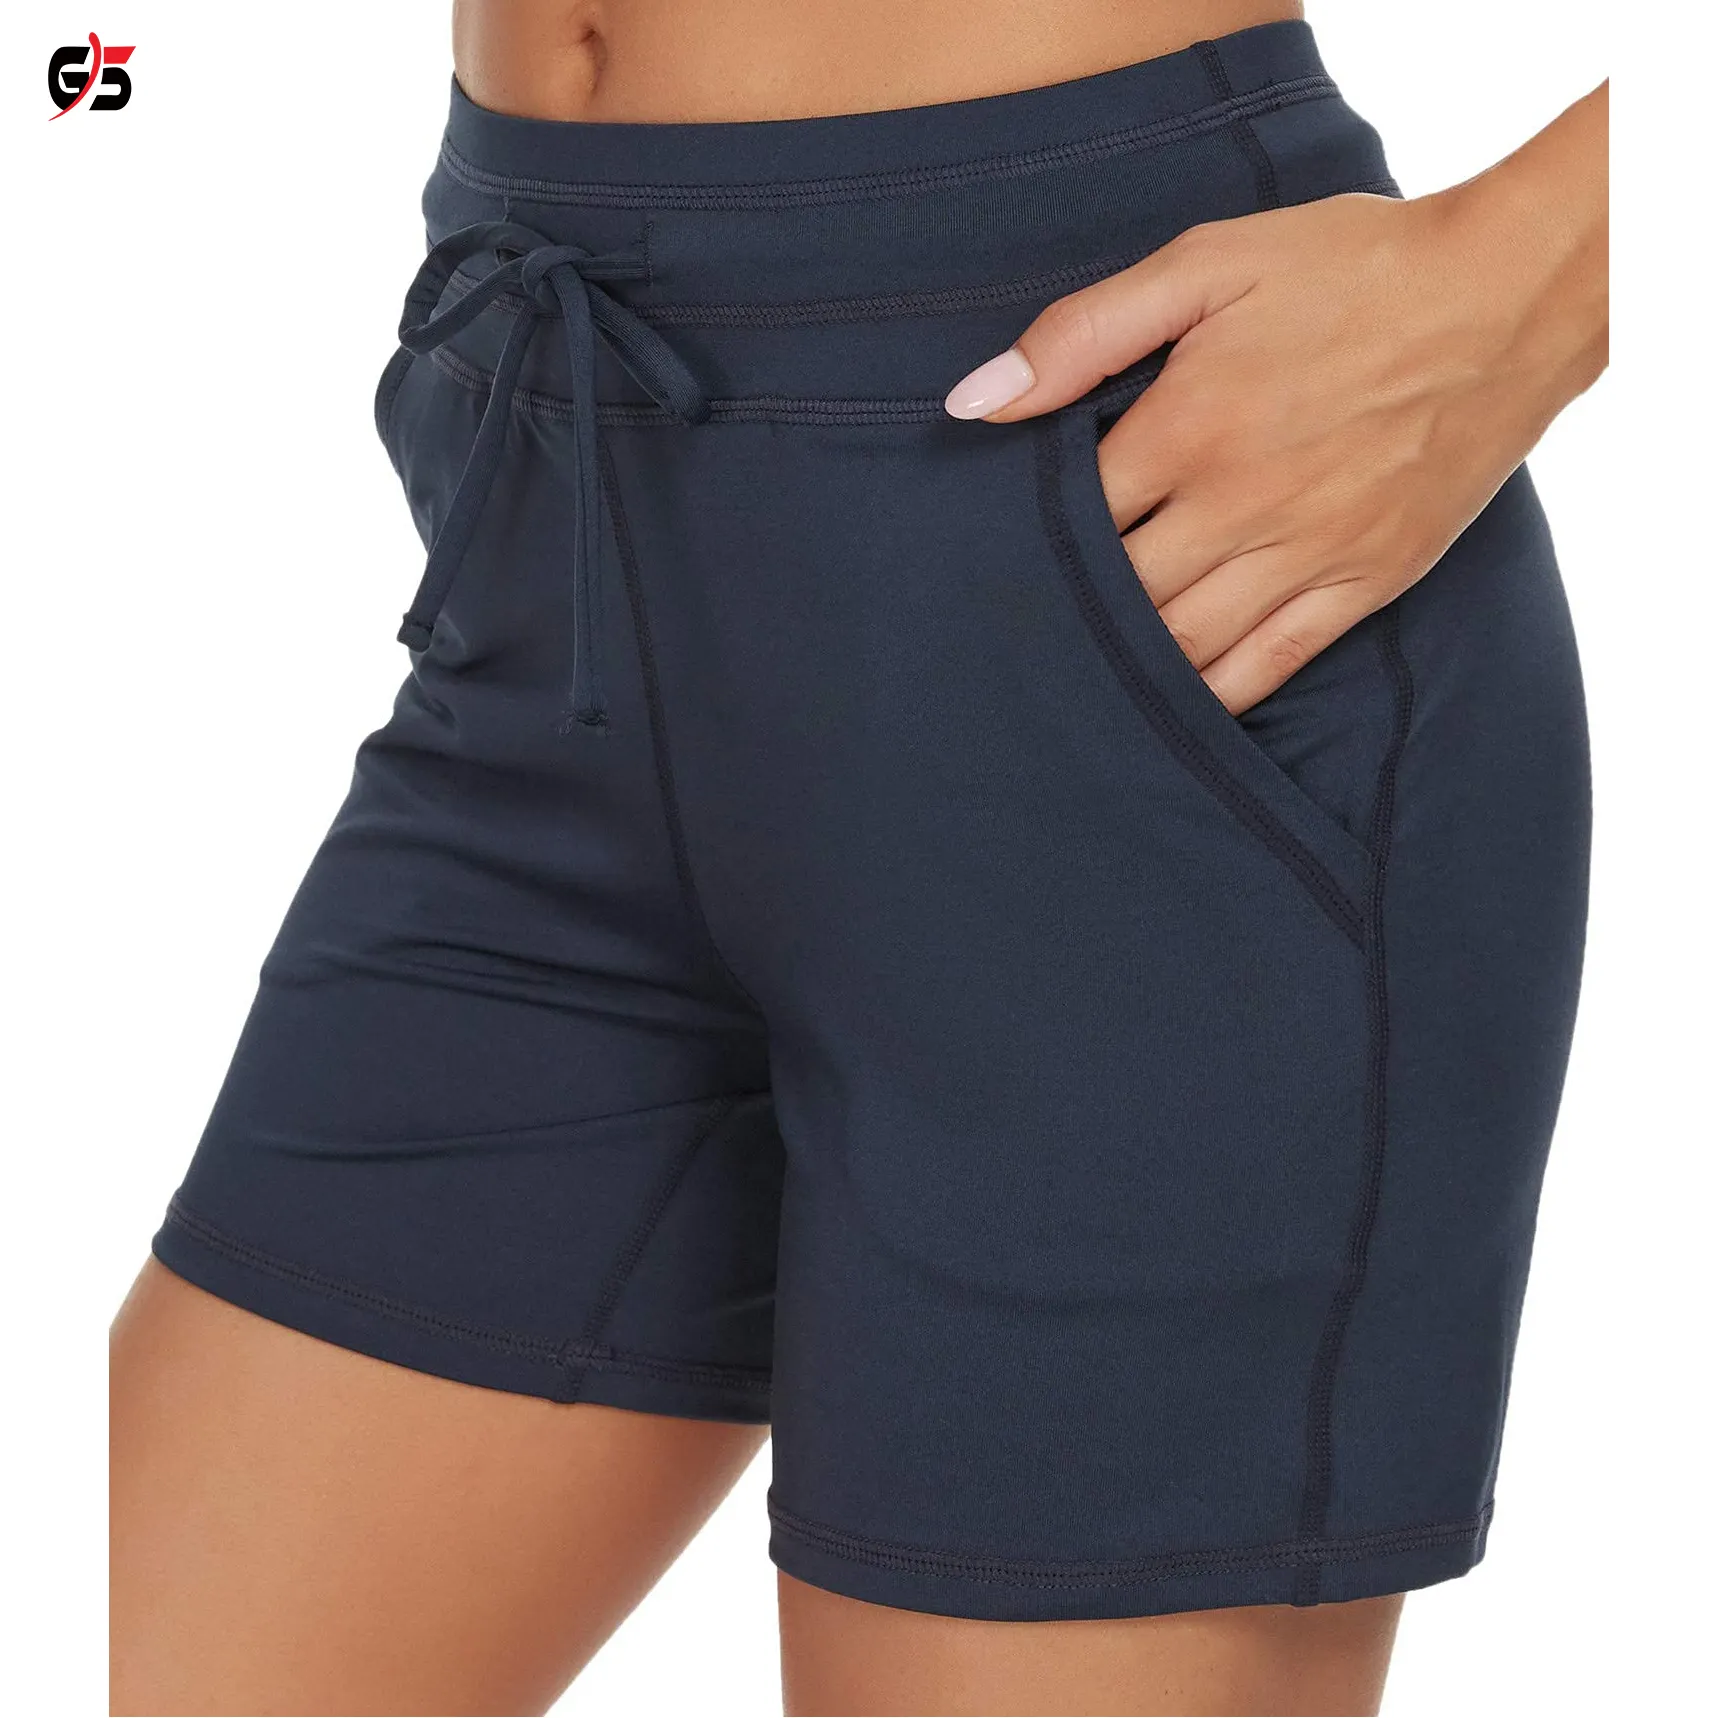 Hot Women's Premium Shorts 100% Polyester Spandex Fabric Customized Logo Printing/Embroidery Yoga Gym Running Wear OEM Product